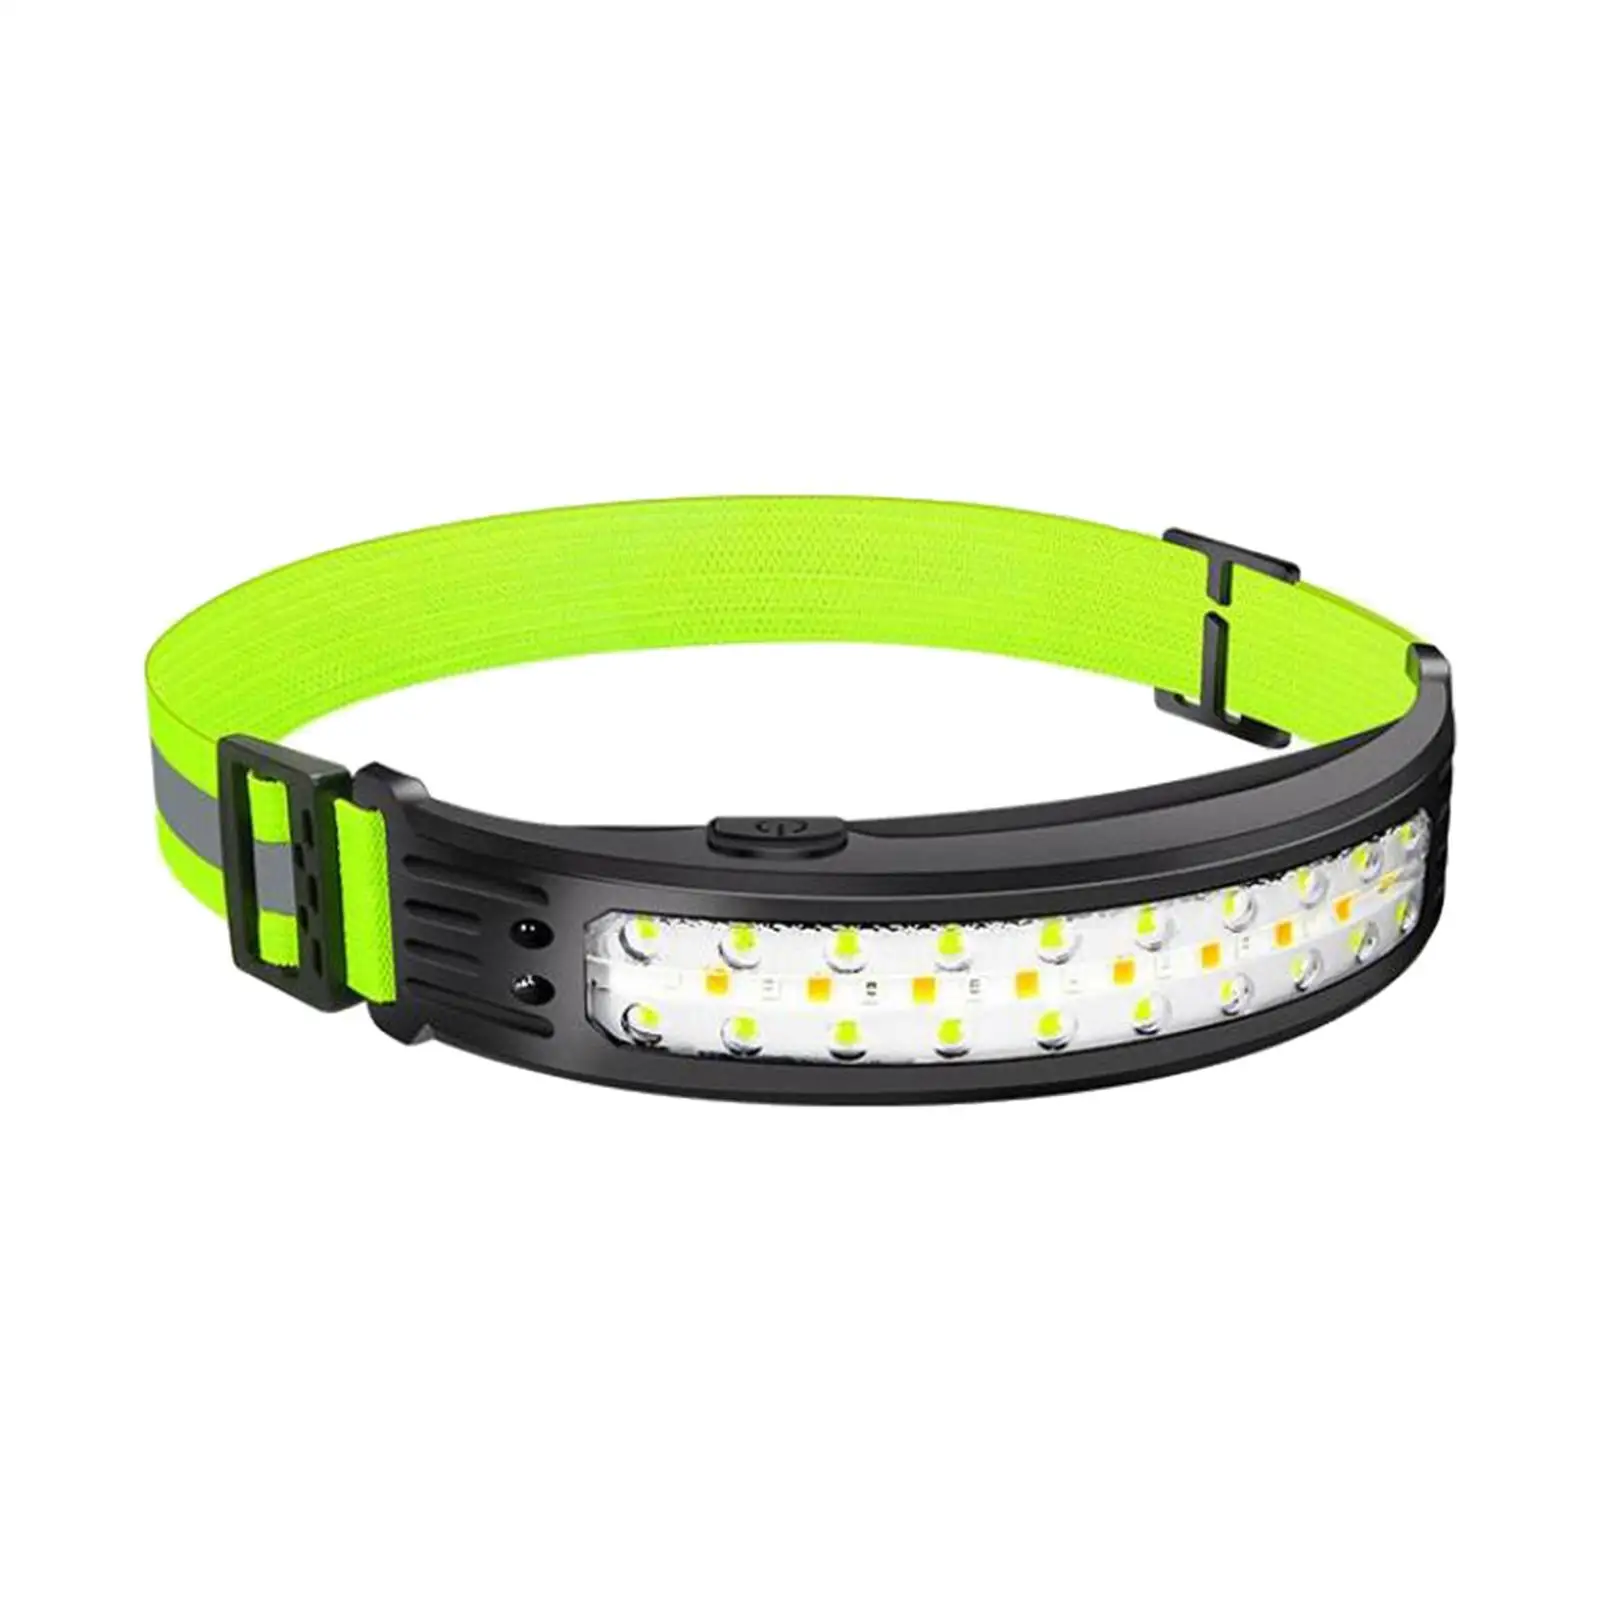 LED Headlamp Durable Portable 5 Adjustable Levels Lights COB Induction Headlamp for Car Repairing Camping Climbing Hiking Outing